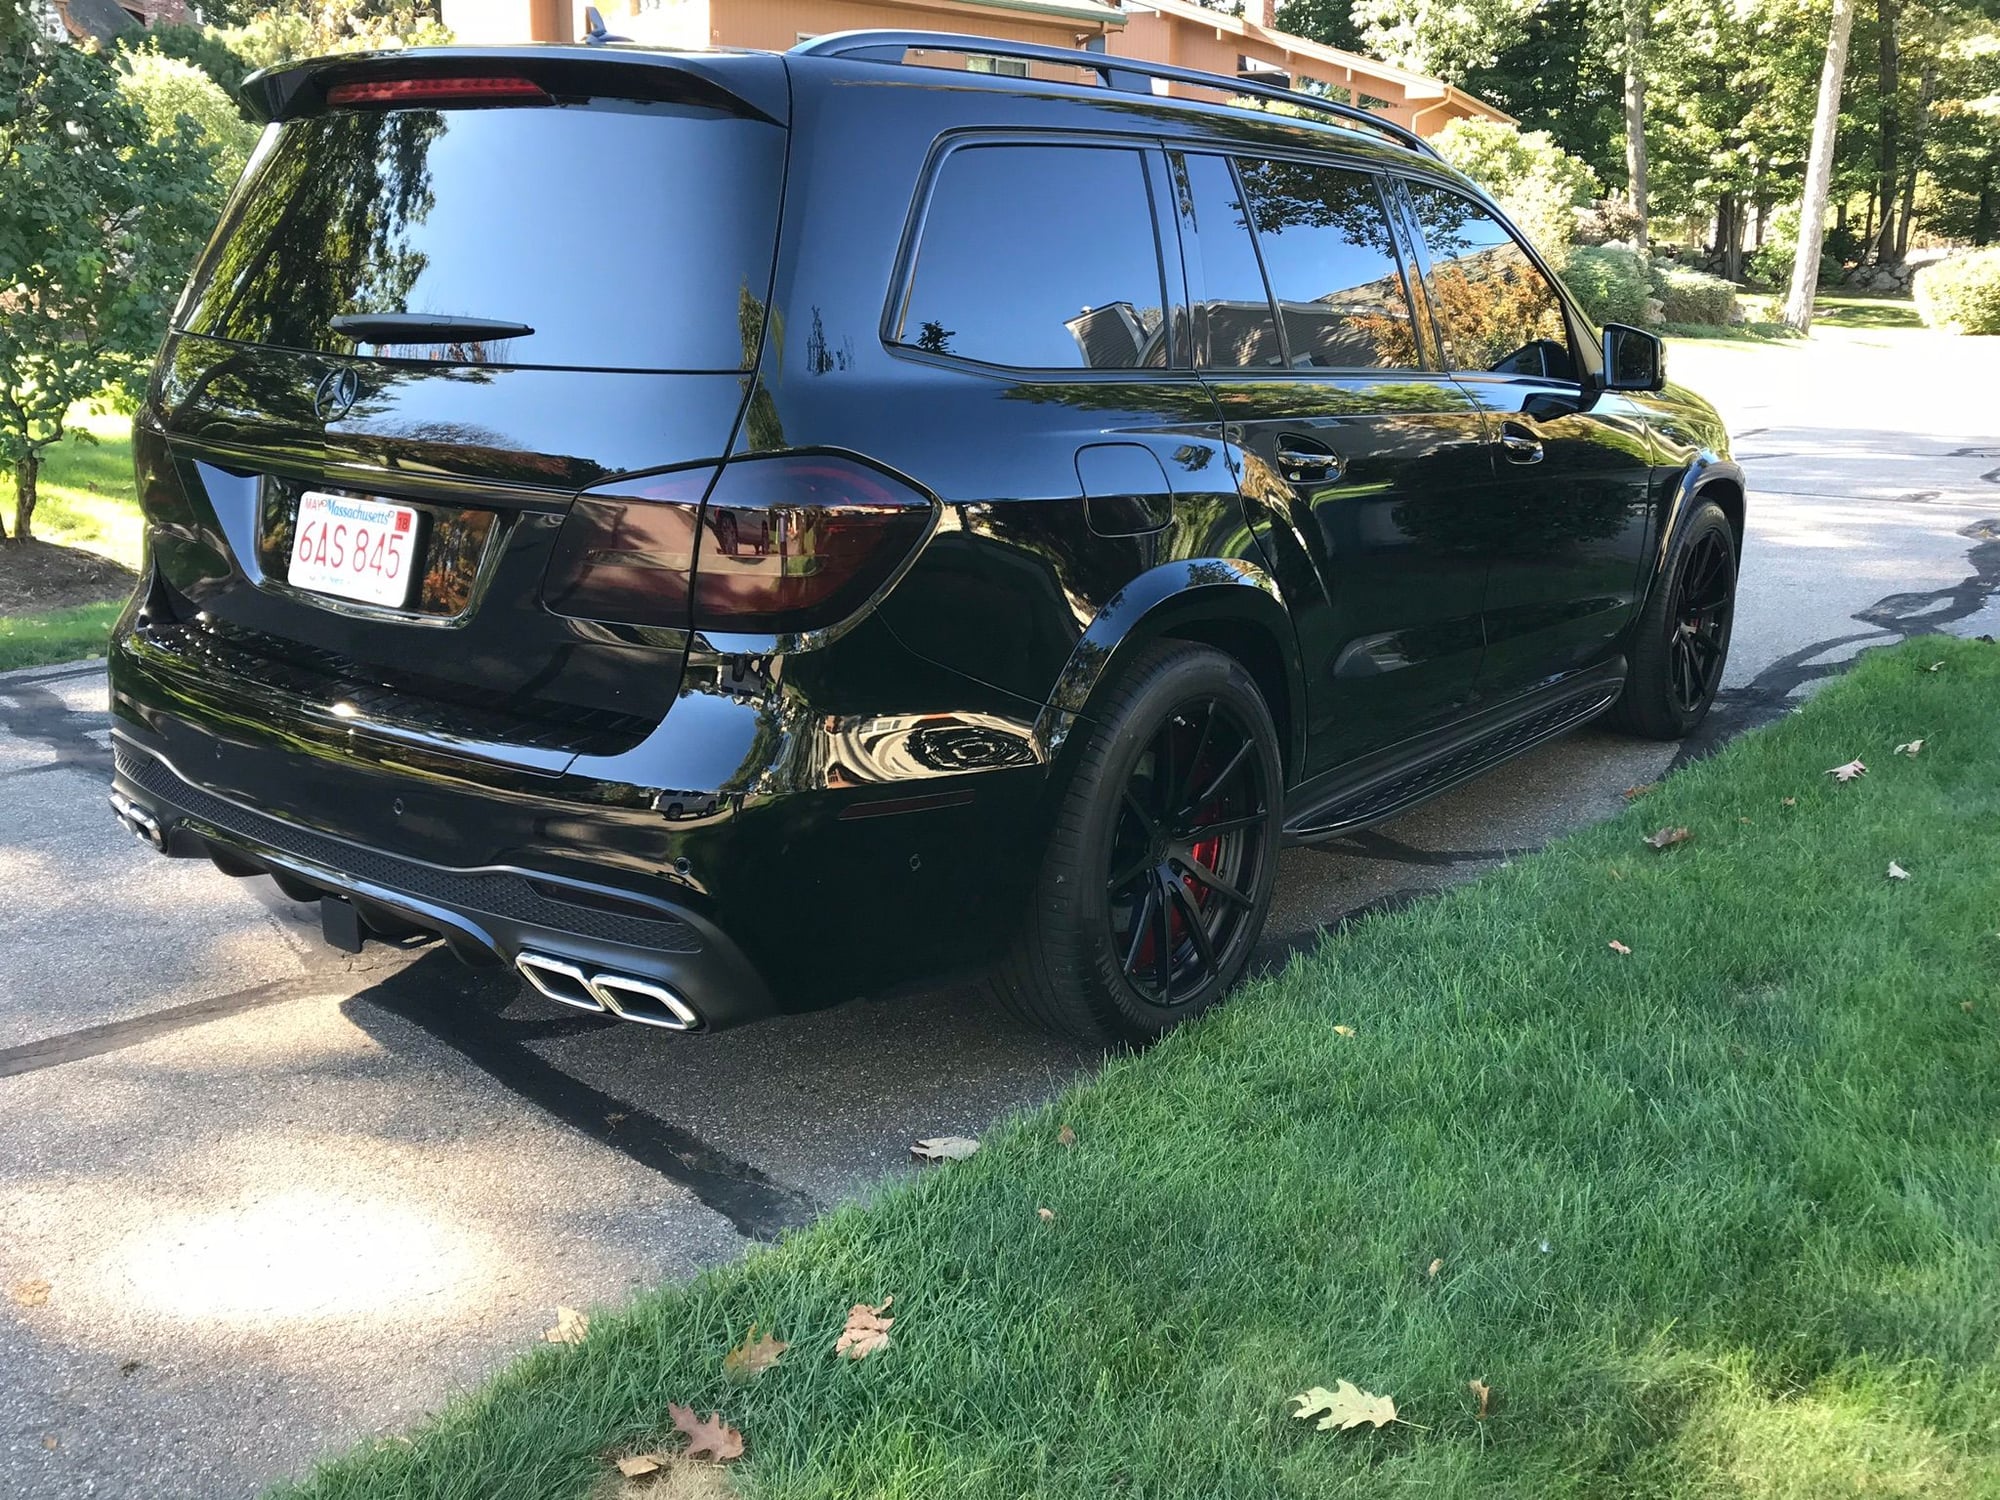 Wheels and Tires/Axles - 21 inch Velos S10 wheels and tire for a GLS 63 satin black - Used - All Years Mercedes-Benz GLS63 AMG - Andover, MA 01810, United States